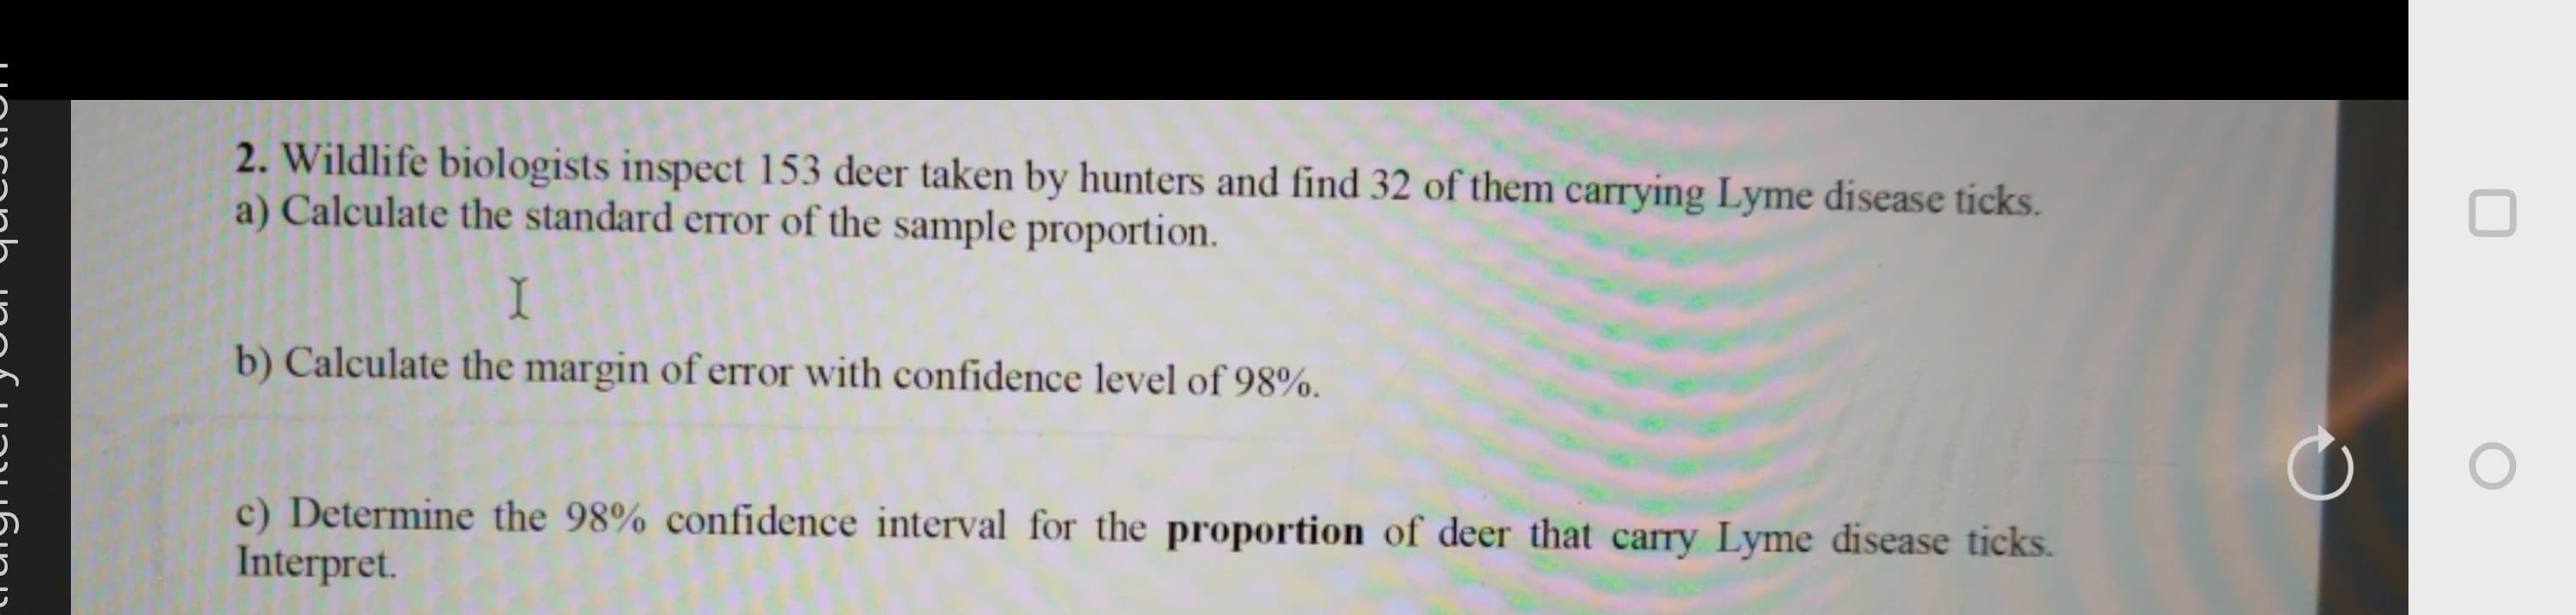 2. Wildlife biologists inspect 153 deer taken by hunters and find 32 of them carrying Lyme disease ticks.
a) Calculate the standard error of the sample proportion.
I
b) Calculate the margin of erTor with confidence level of 98%.
c) Determine the 98% confidence interval for the proportion of deer that carry Lyme disease ticks.
Interpret.
